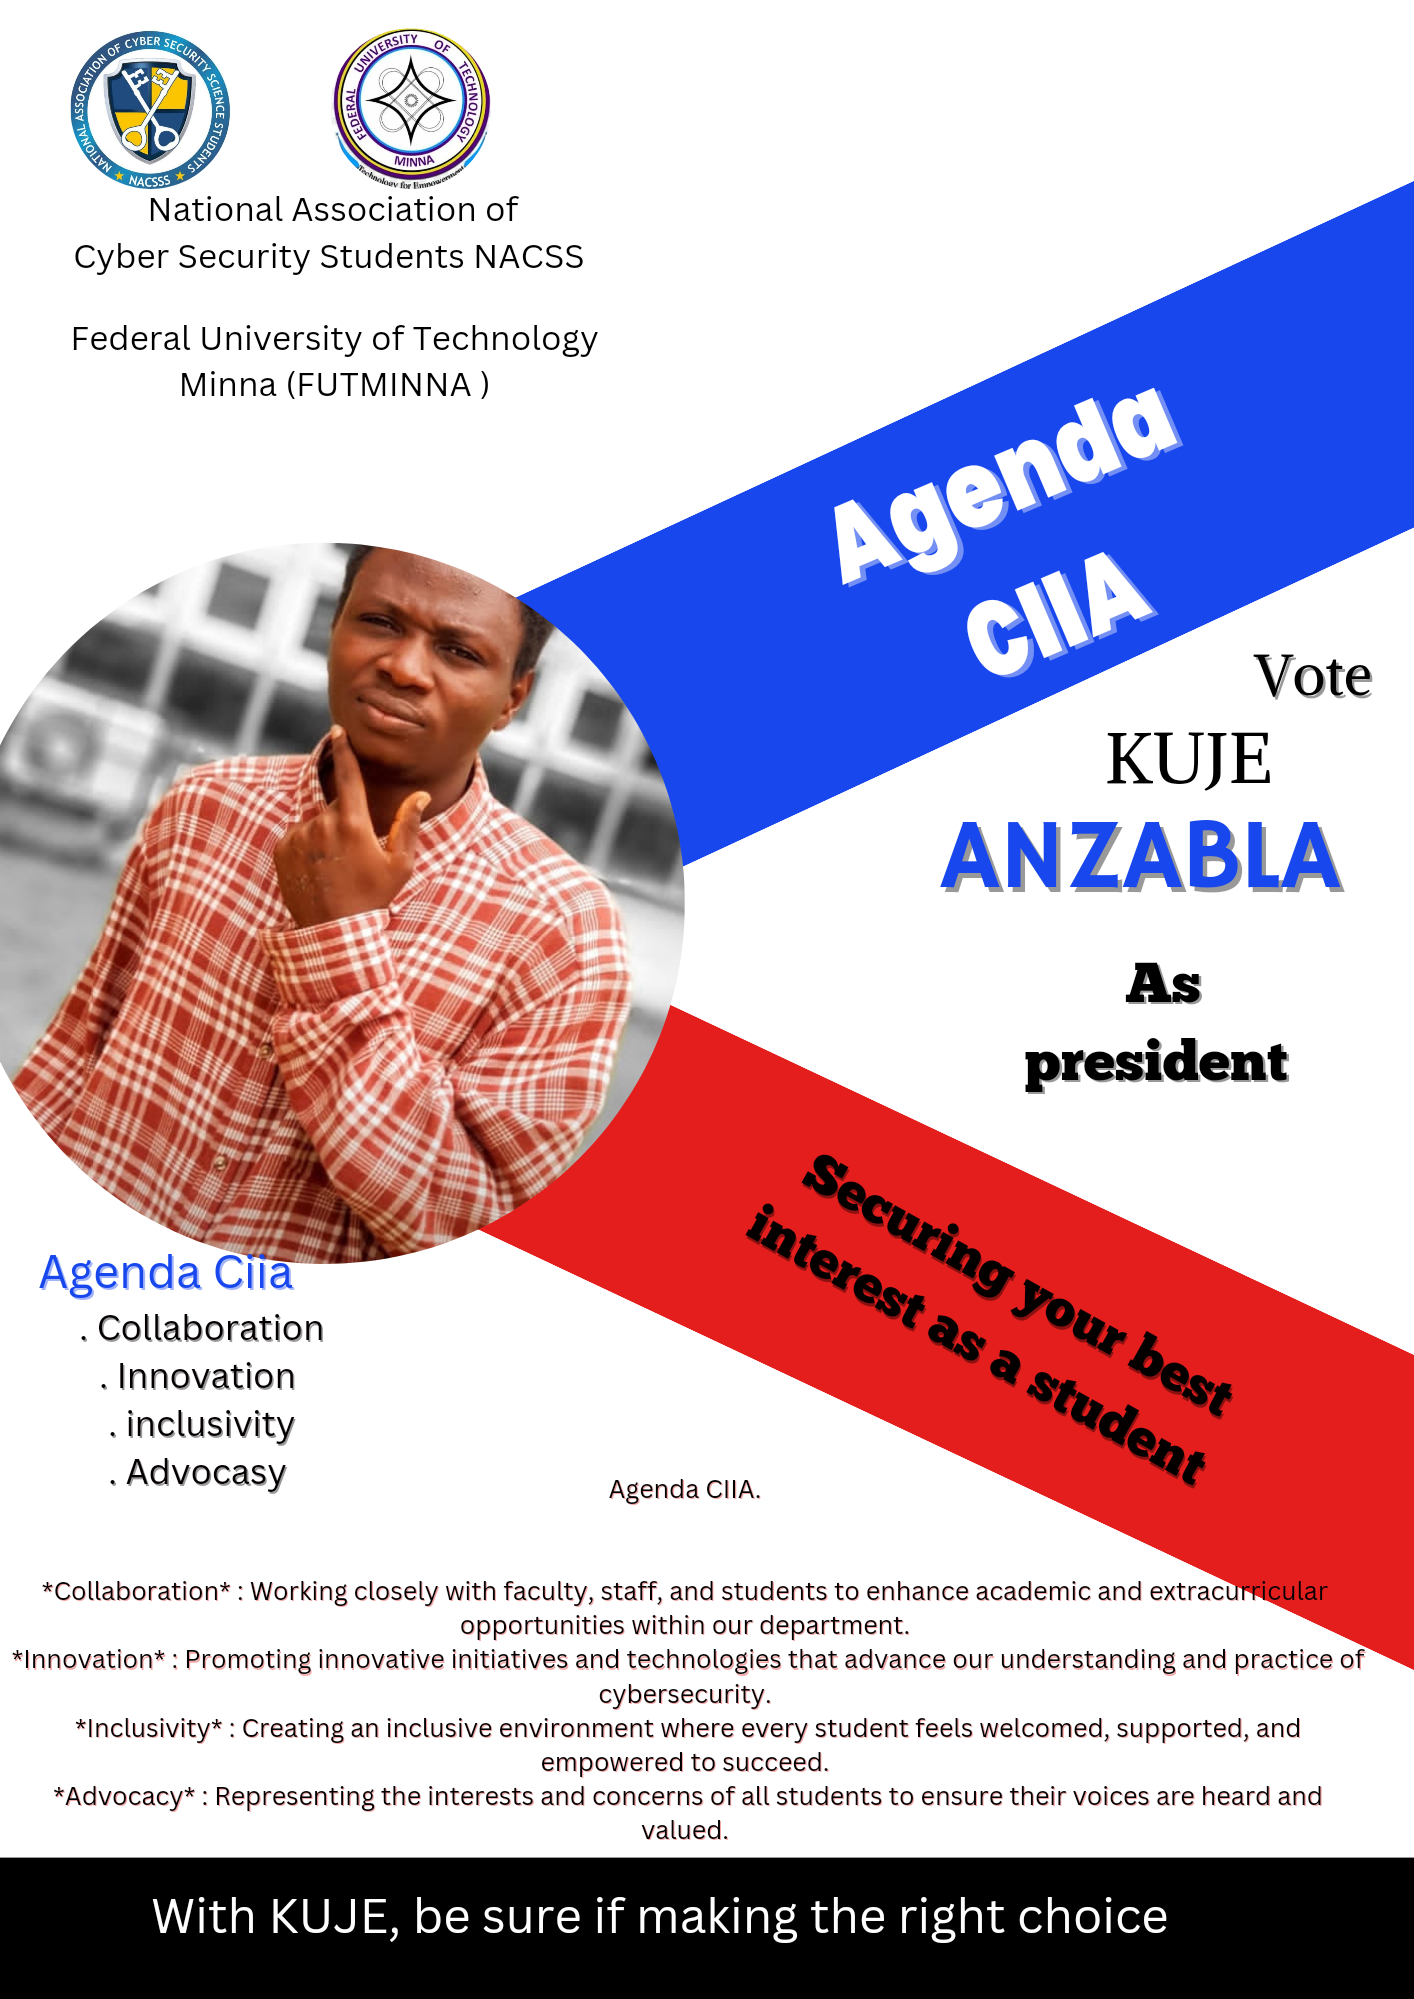 Cyber Security Students NACSS

Federal University of Technology
Minna (FUTMINNA)

Agenda Cia
. Collaboration

. Innovation

. inclusivity

. Advocasy

  
 
   
 

Agenda CIIA.

*Collaboration* : Working closely with faculty, staff, and students to enhance academic and extrac
opportunities within our department.
*Innovation* : Promoting innovative initiatives and technologies that advance our understanding and practice of
cybersecurity.
*Inclusivity* : Creating an inclusive environment where every student feels welcomed, supported, and
empowered to succeed.
*Advocacy* : Representing the interests and concerns of all students to ensure their voices are heard and
valued.

With KUJE, be sure if making the right choice